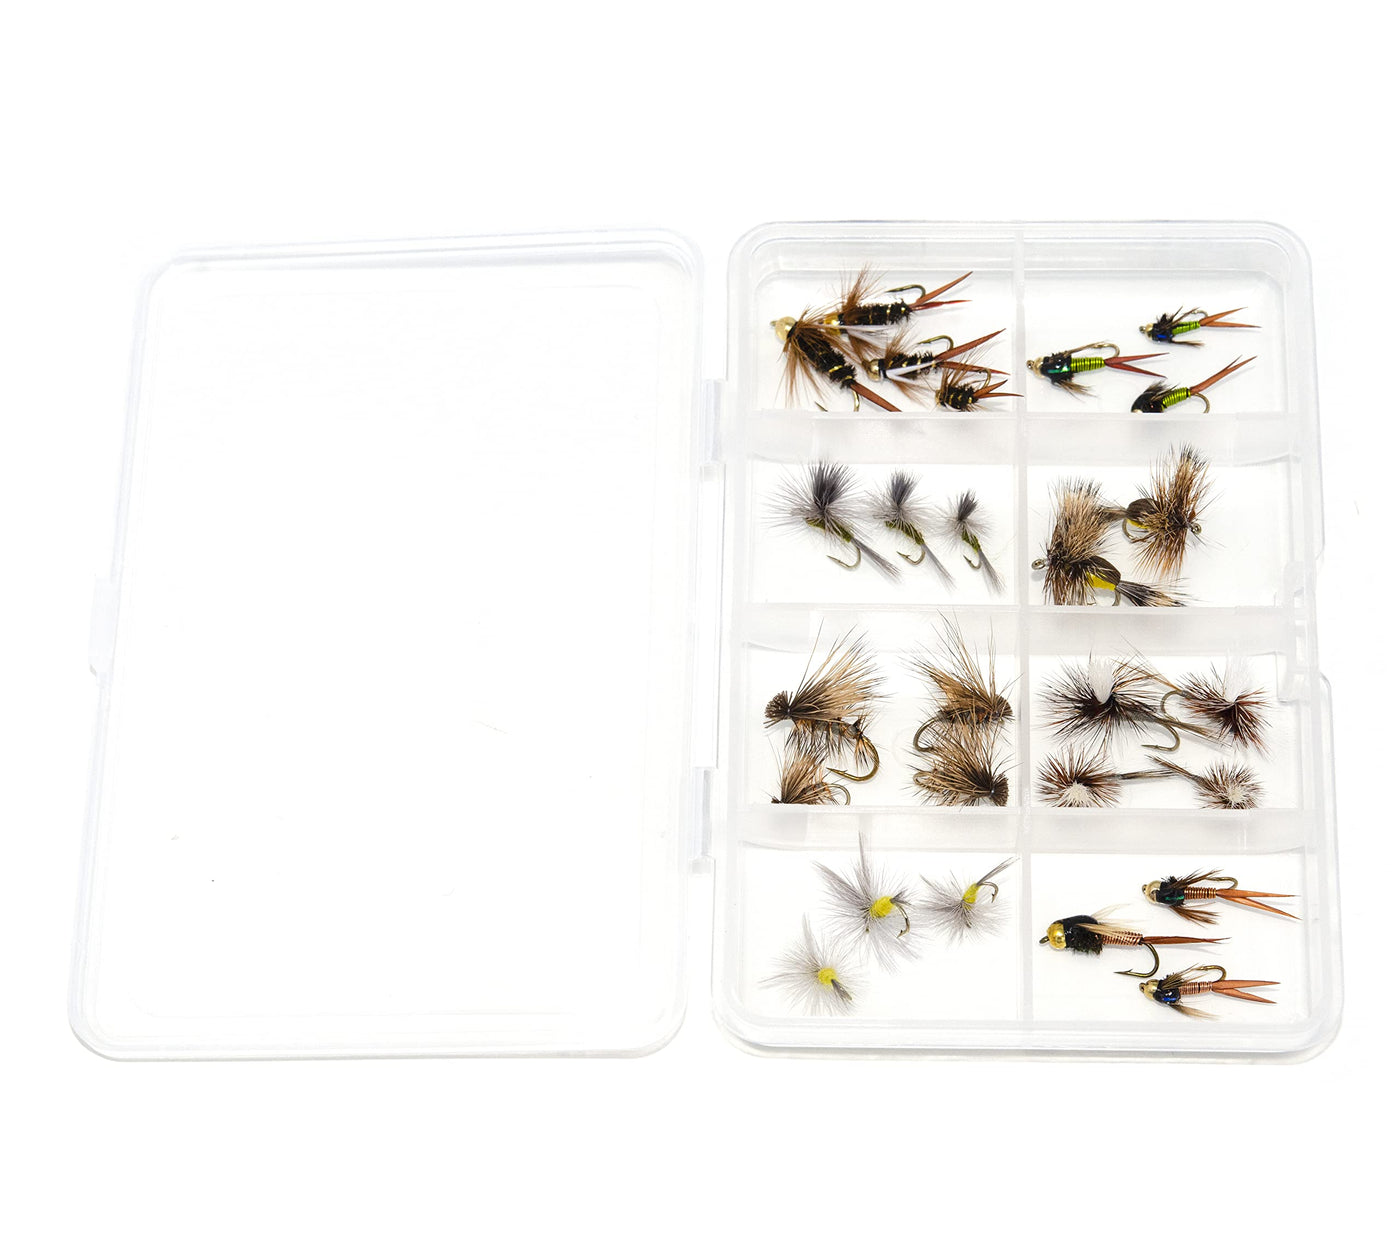 26 Essential Trout Fly Fishing Flies Assortment, Dry, Wet, Nymphs, Caddis  Fly Lures, Size #10 - #18